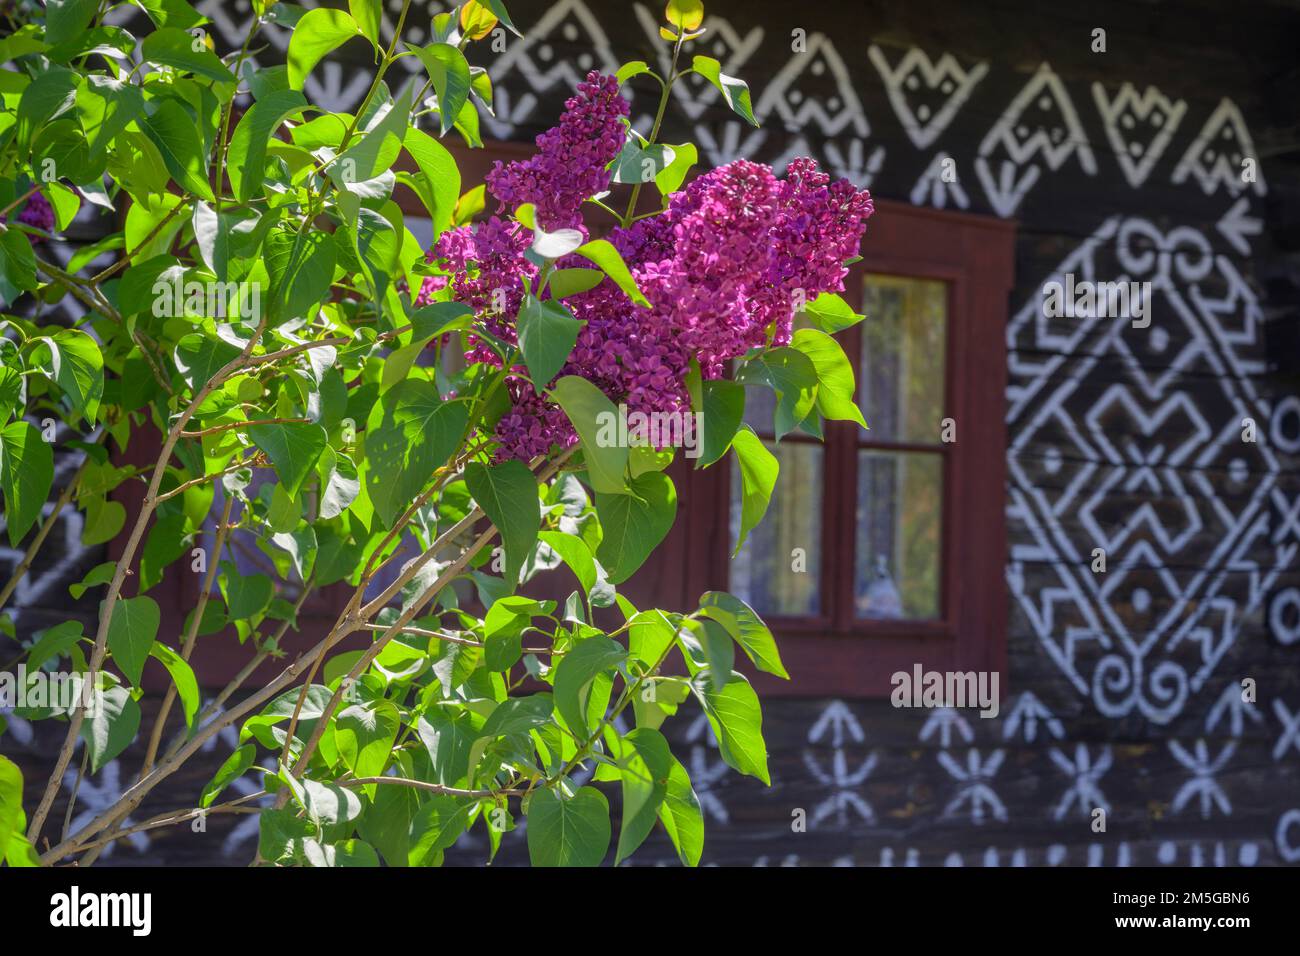 Flowering lilacs in front of painted wooden house Unesco World Heritage Site, Cicmany, Zilinsky kraj, Slovakia Stock Photo